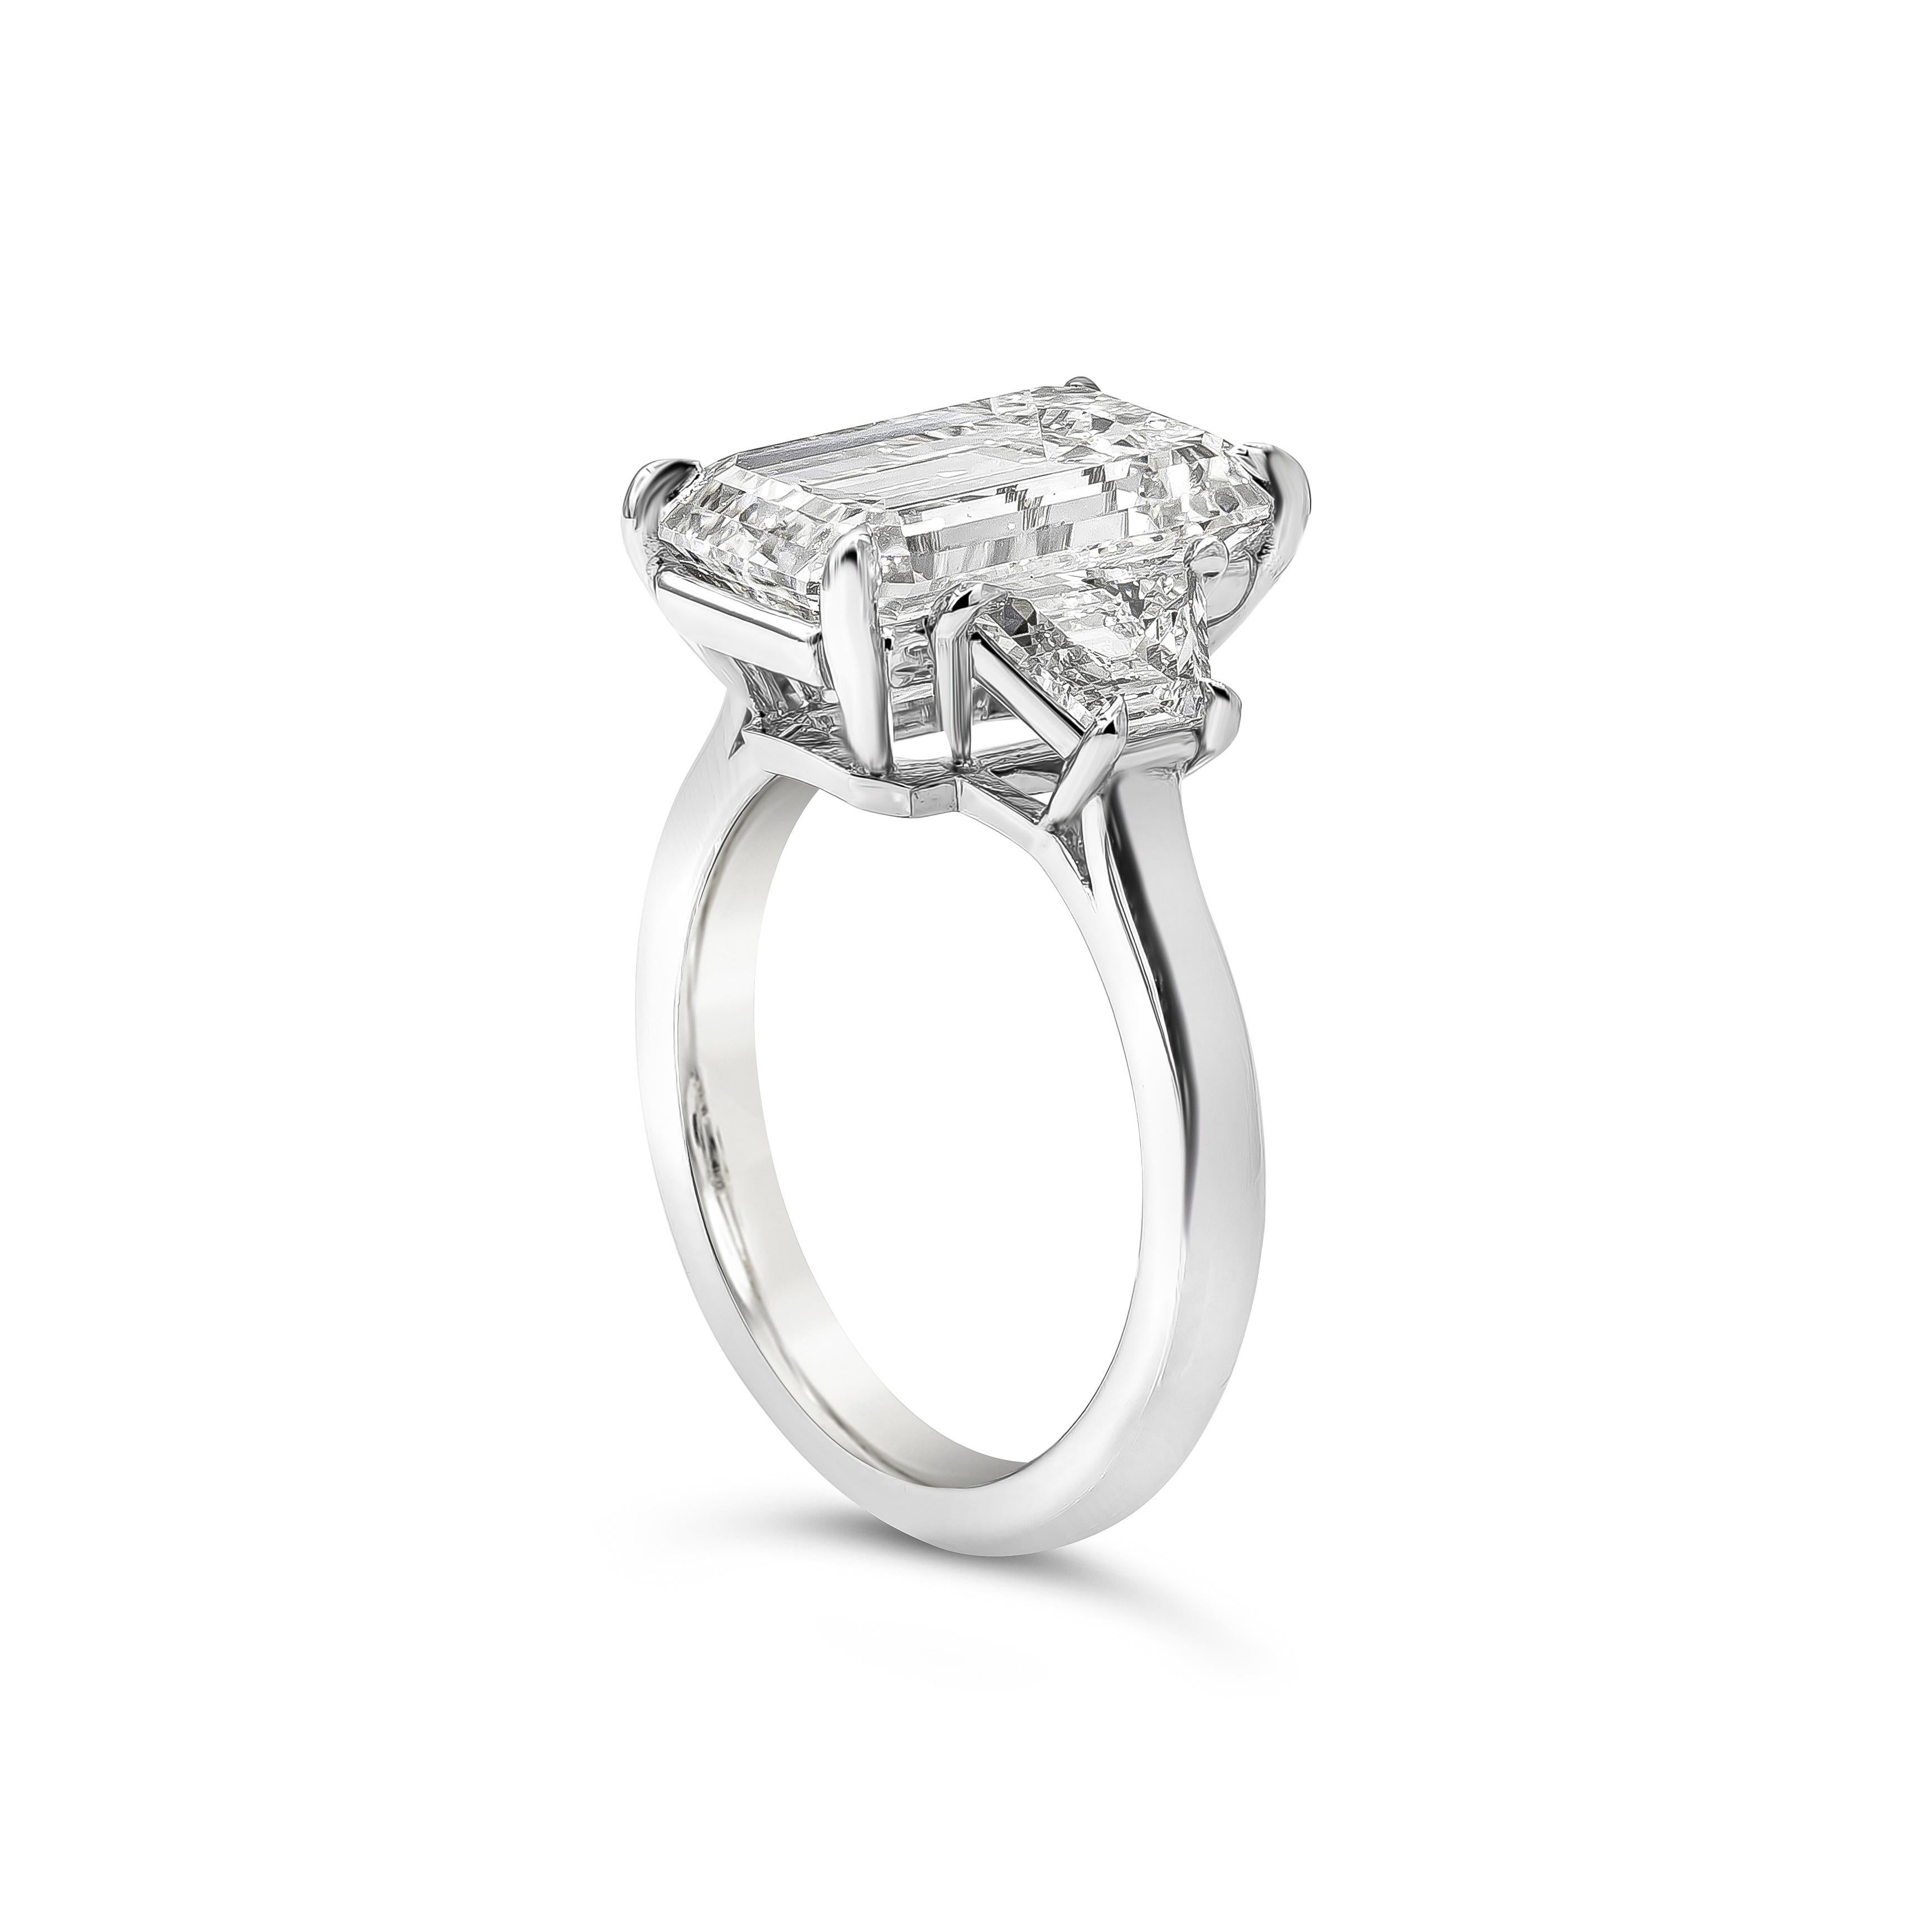 Contemporary GIA Certified 5.80 Carat Emerald Cut Diamond Three-Stone Engagement Ring